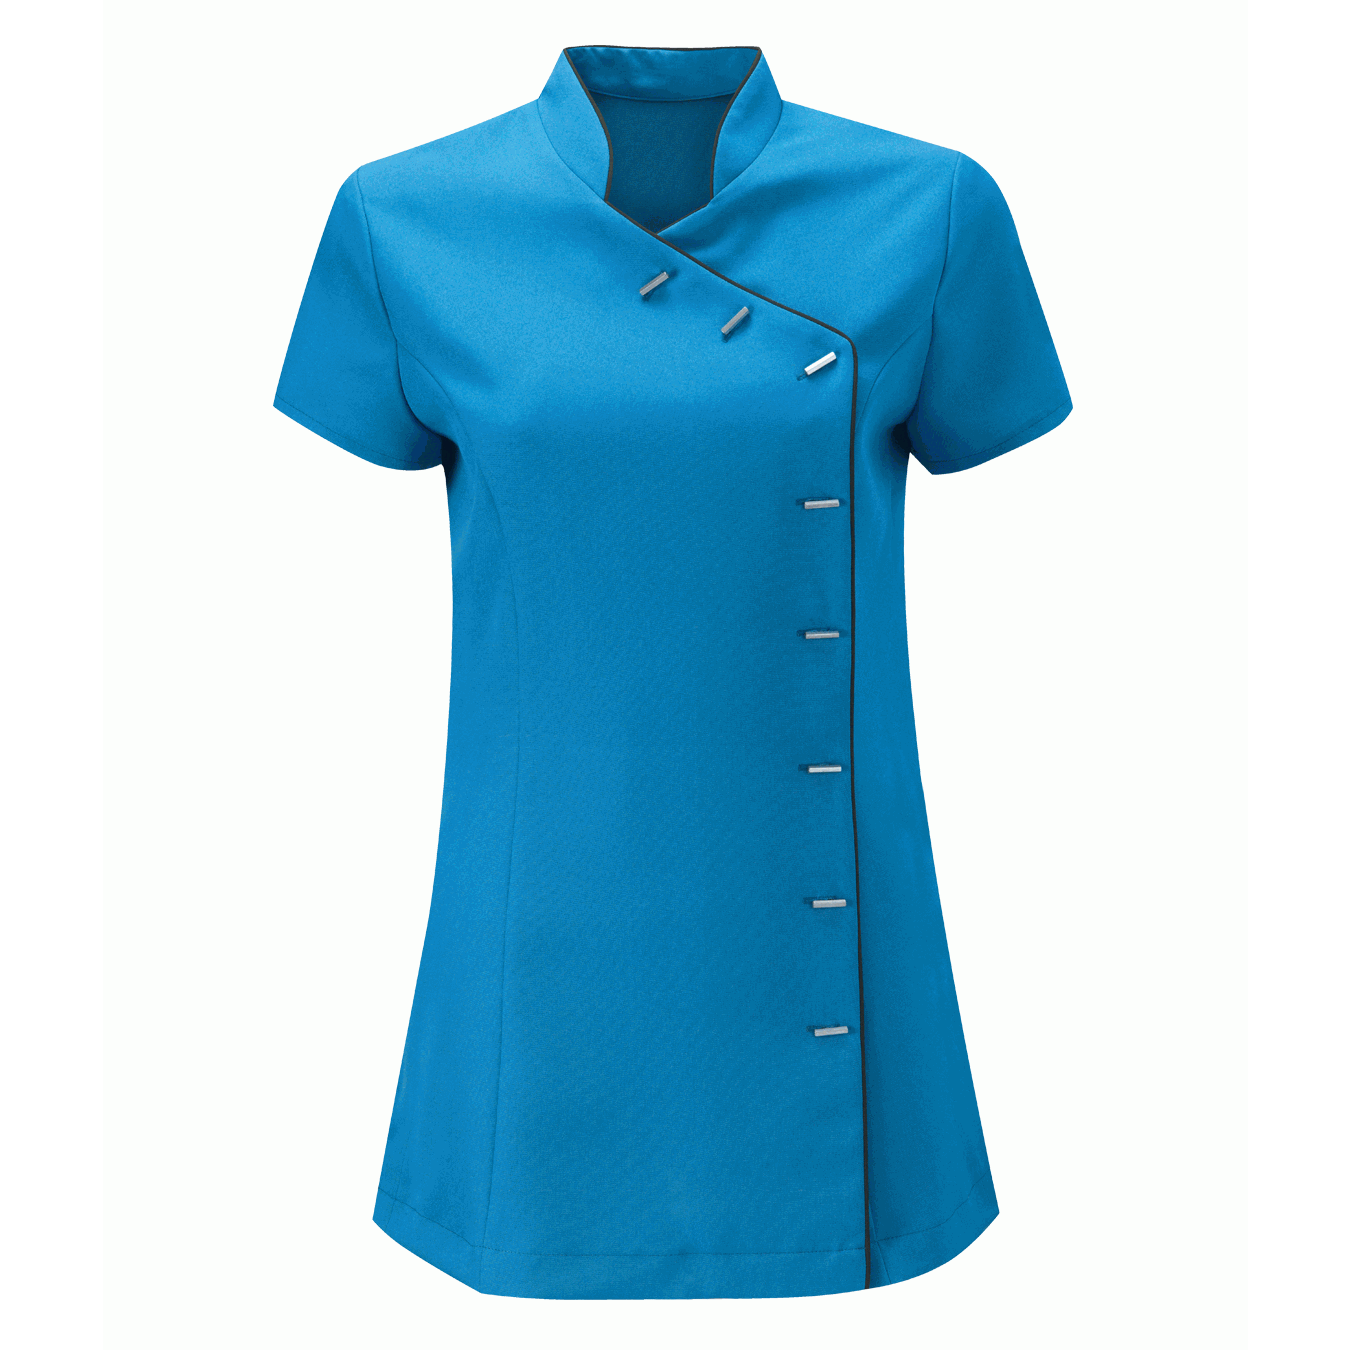 Beauty Tunic contrast Teal & Black